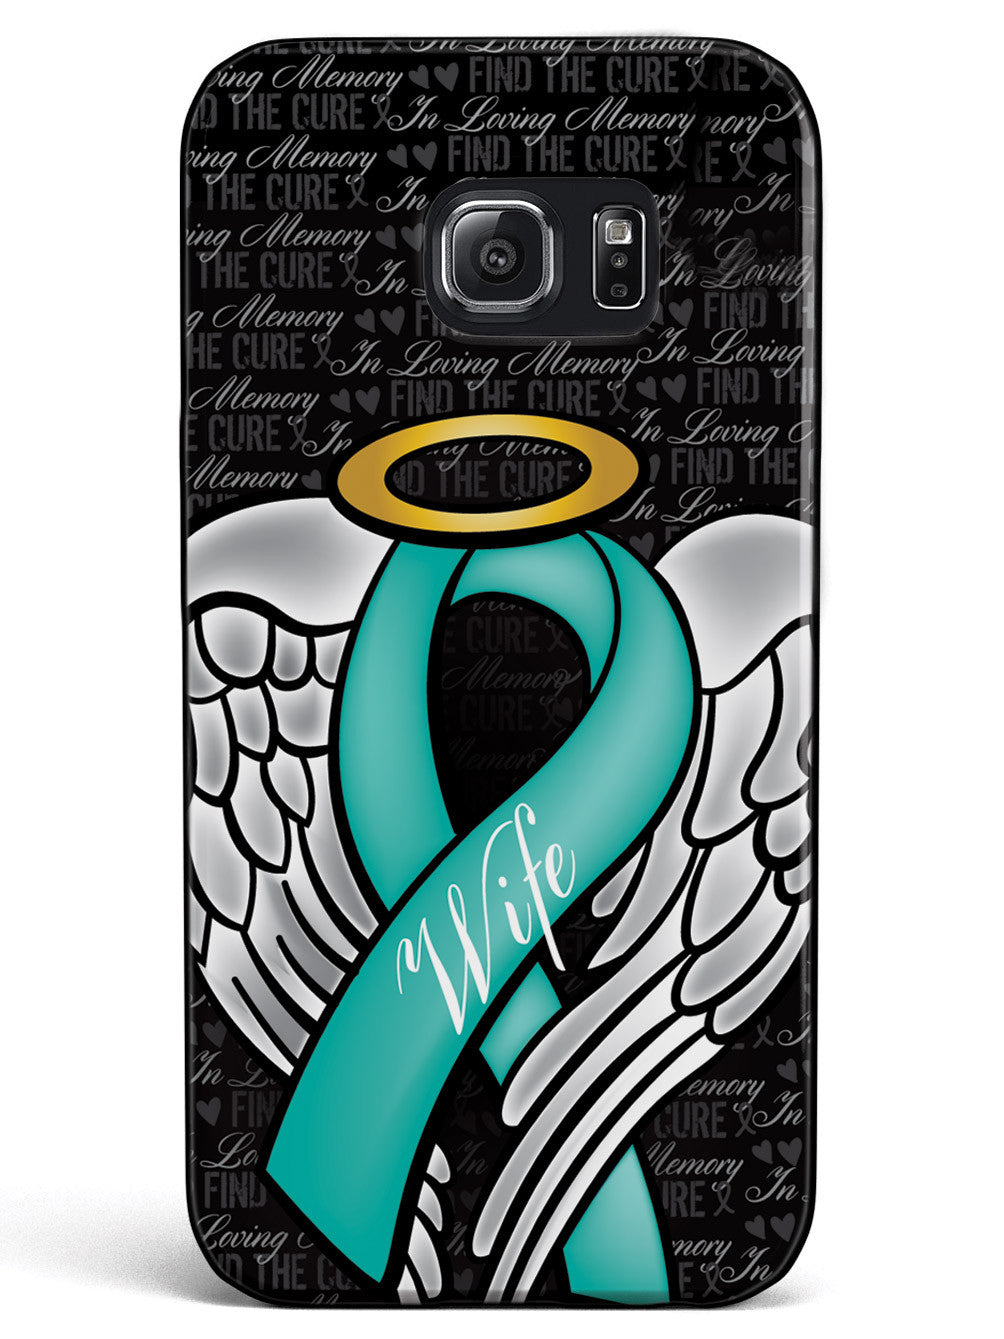 In Loving Memory of My Wife - Teal Ribbon Case